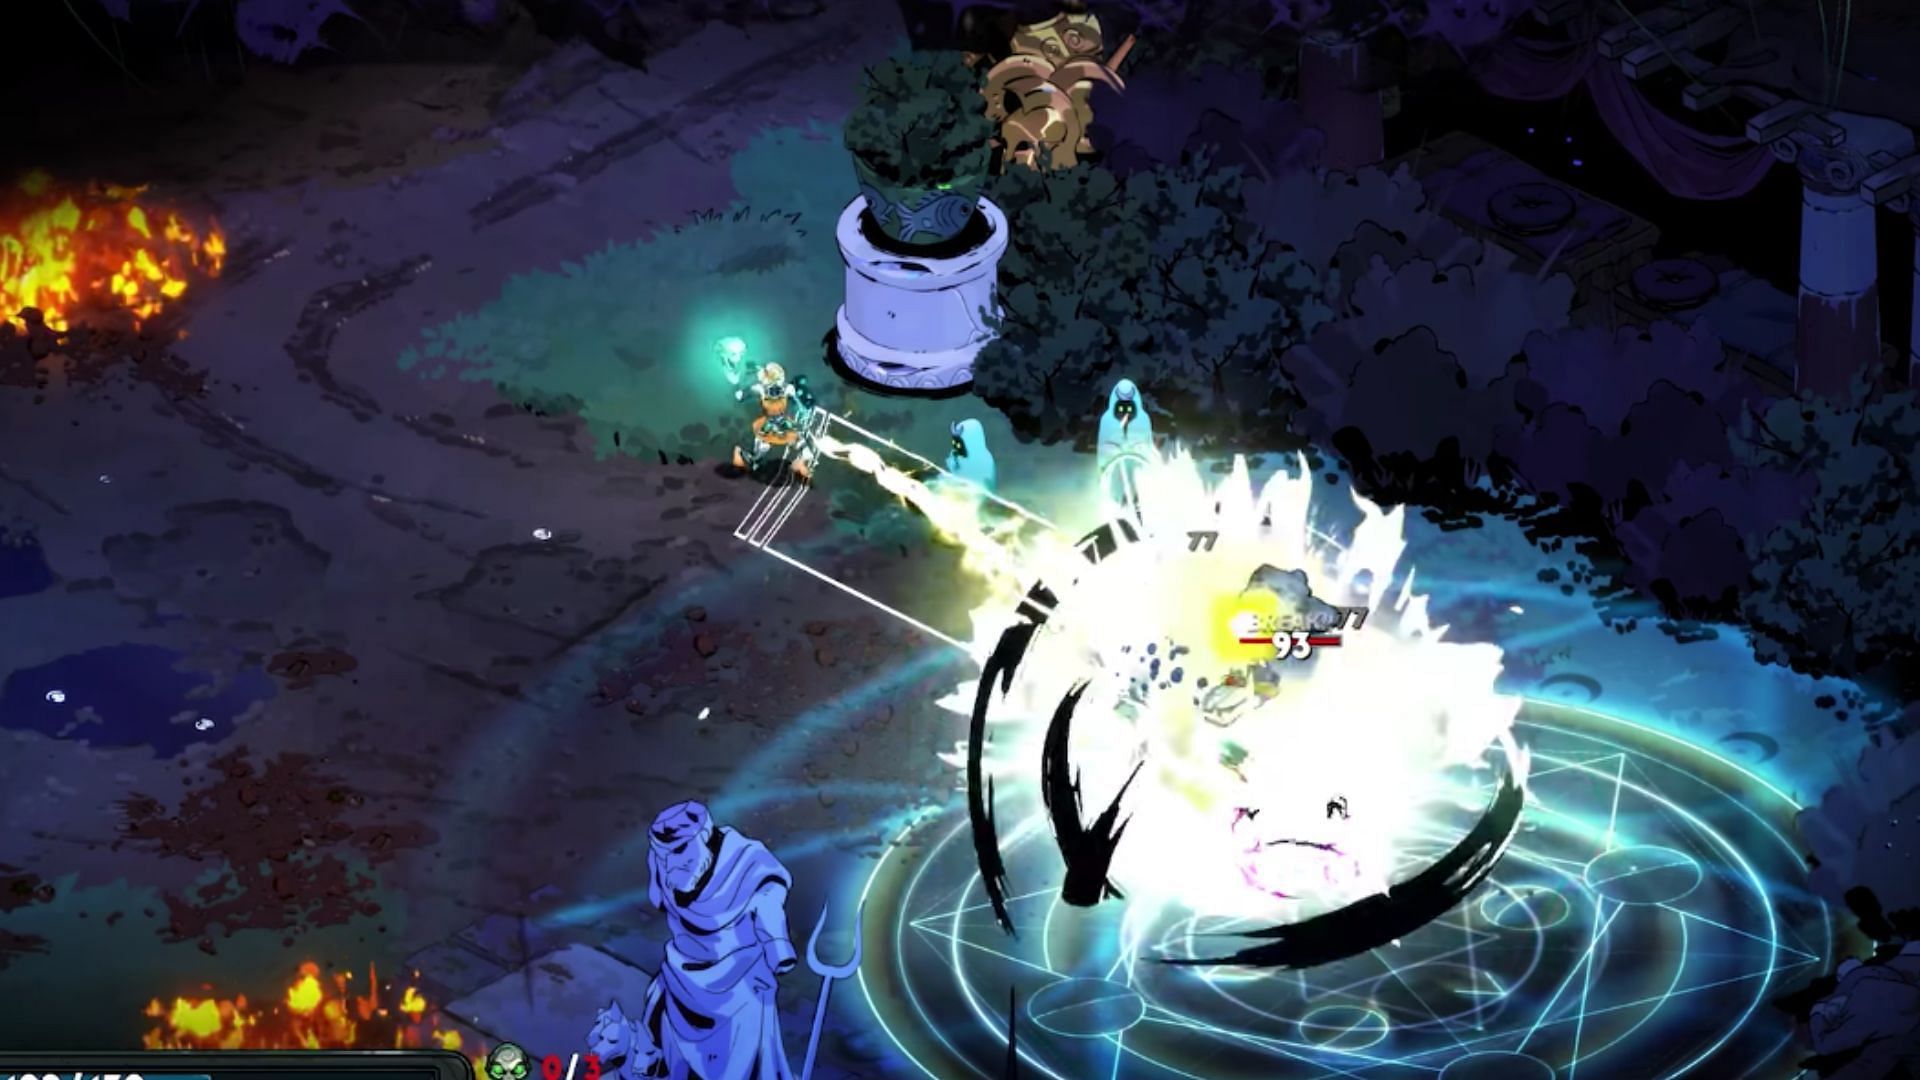 Demeter offers some handy boons in Hades 2 (Image via Supergiant Games)